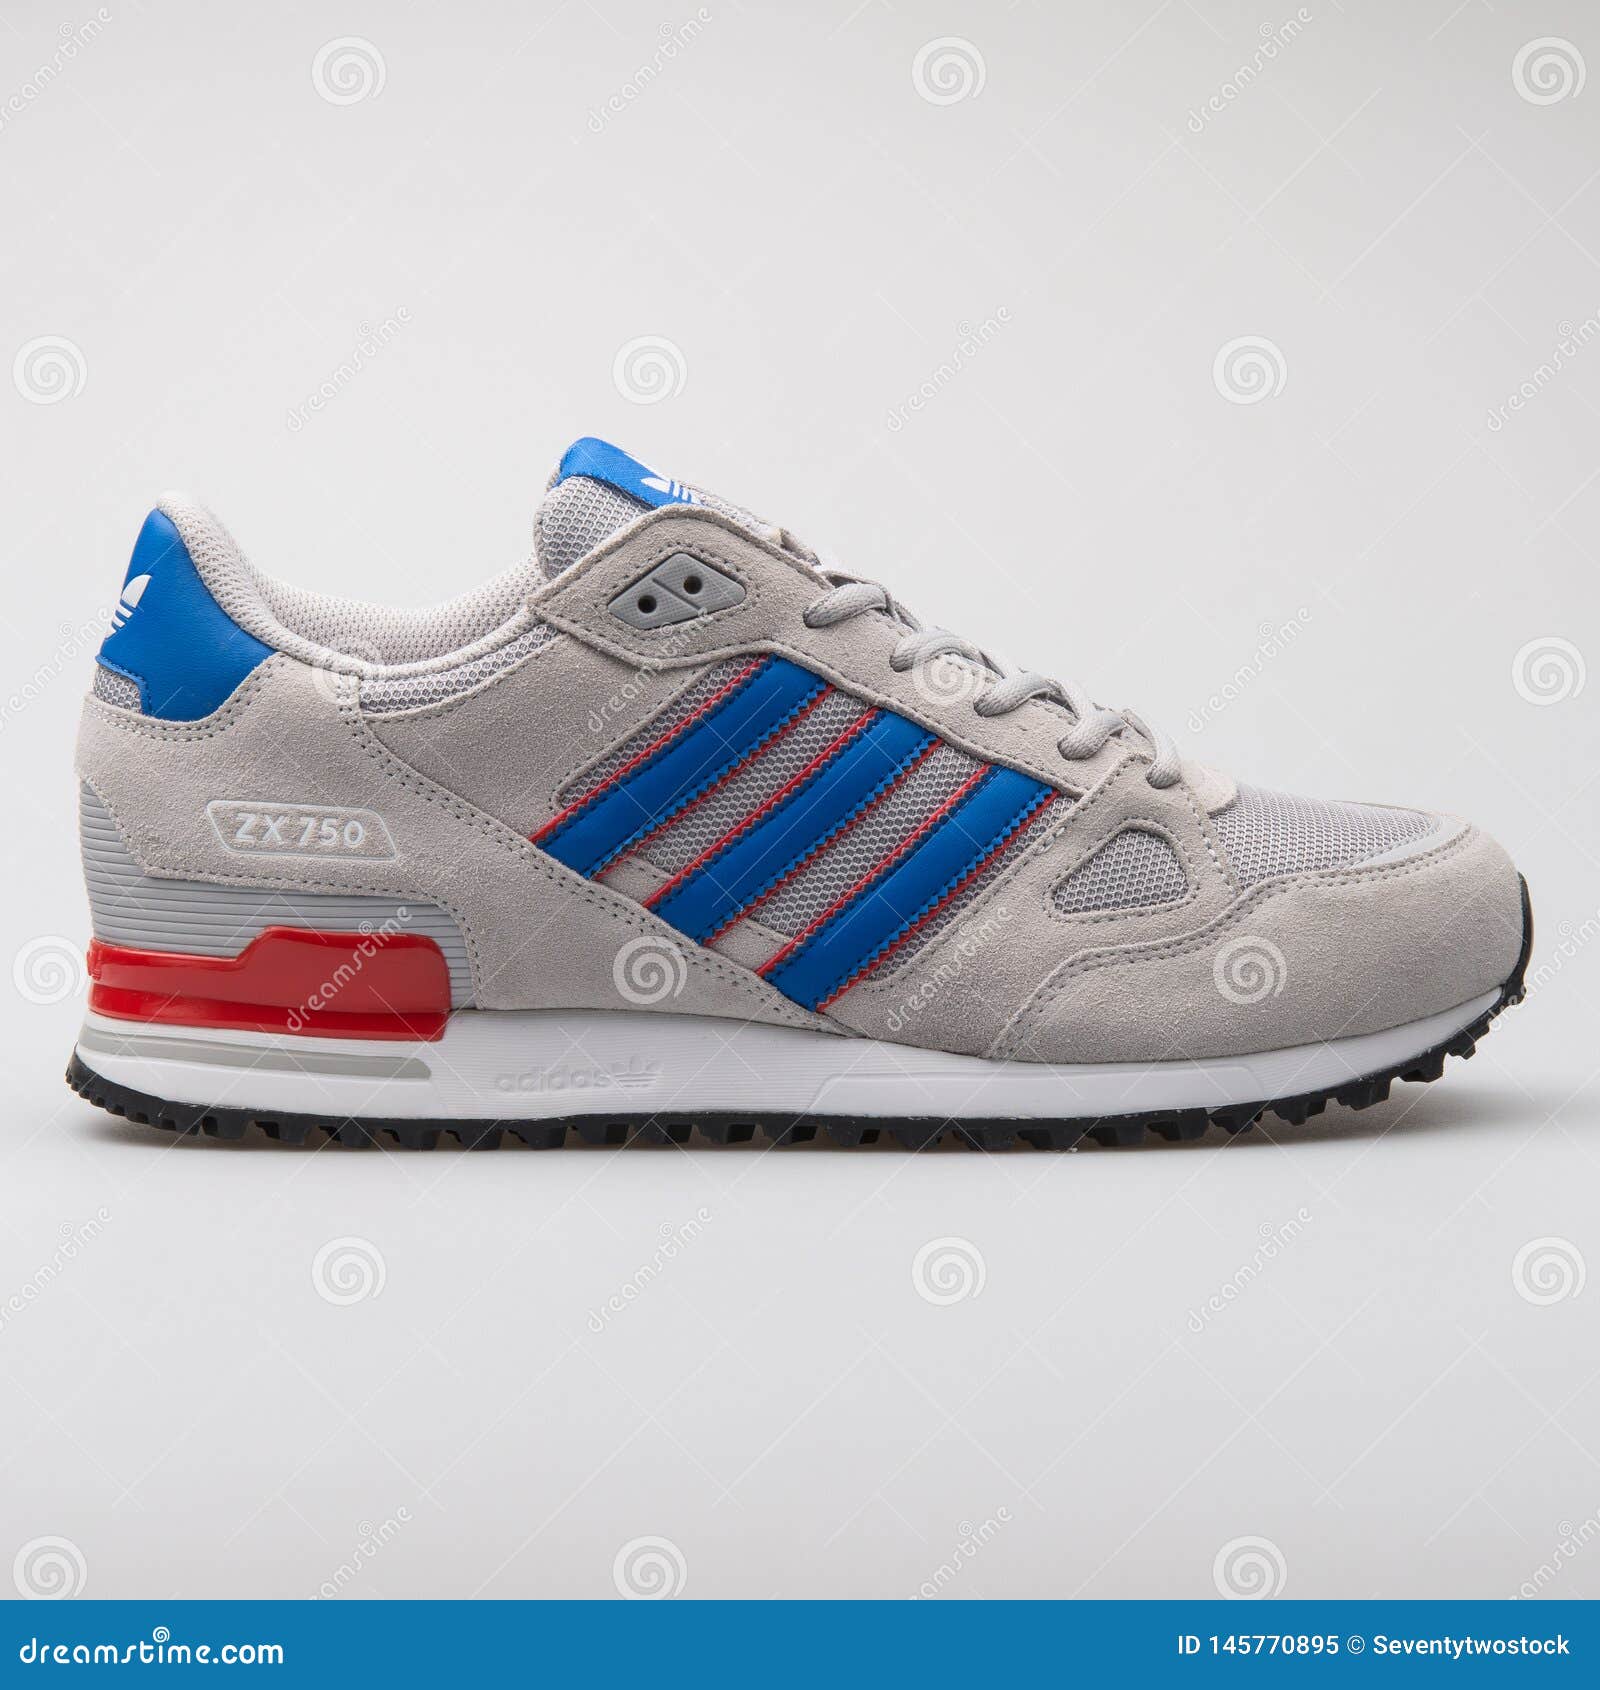 kapre fjols Misforståelse Adidas ZX750 Grey, Blue and Red Sneaker Editorial Image - Image of  exercise, product: 145770895